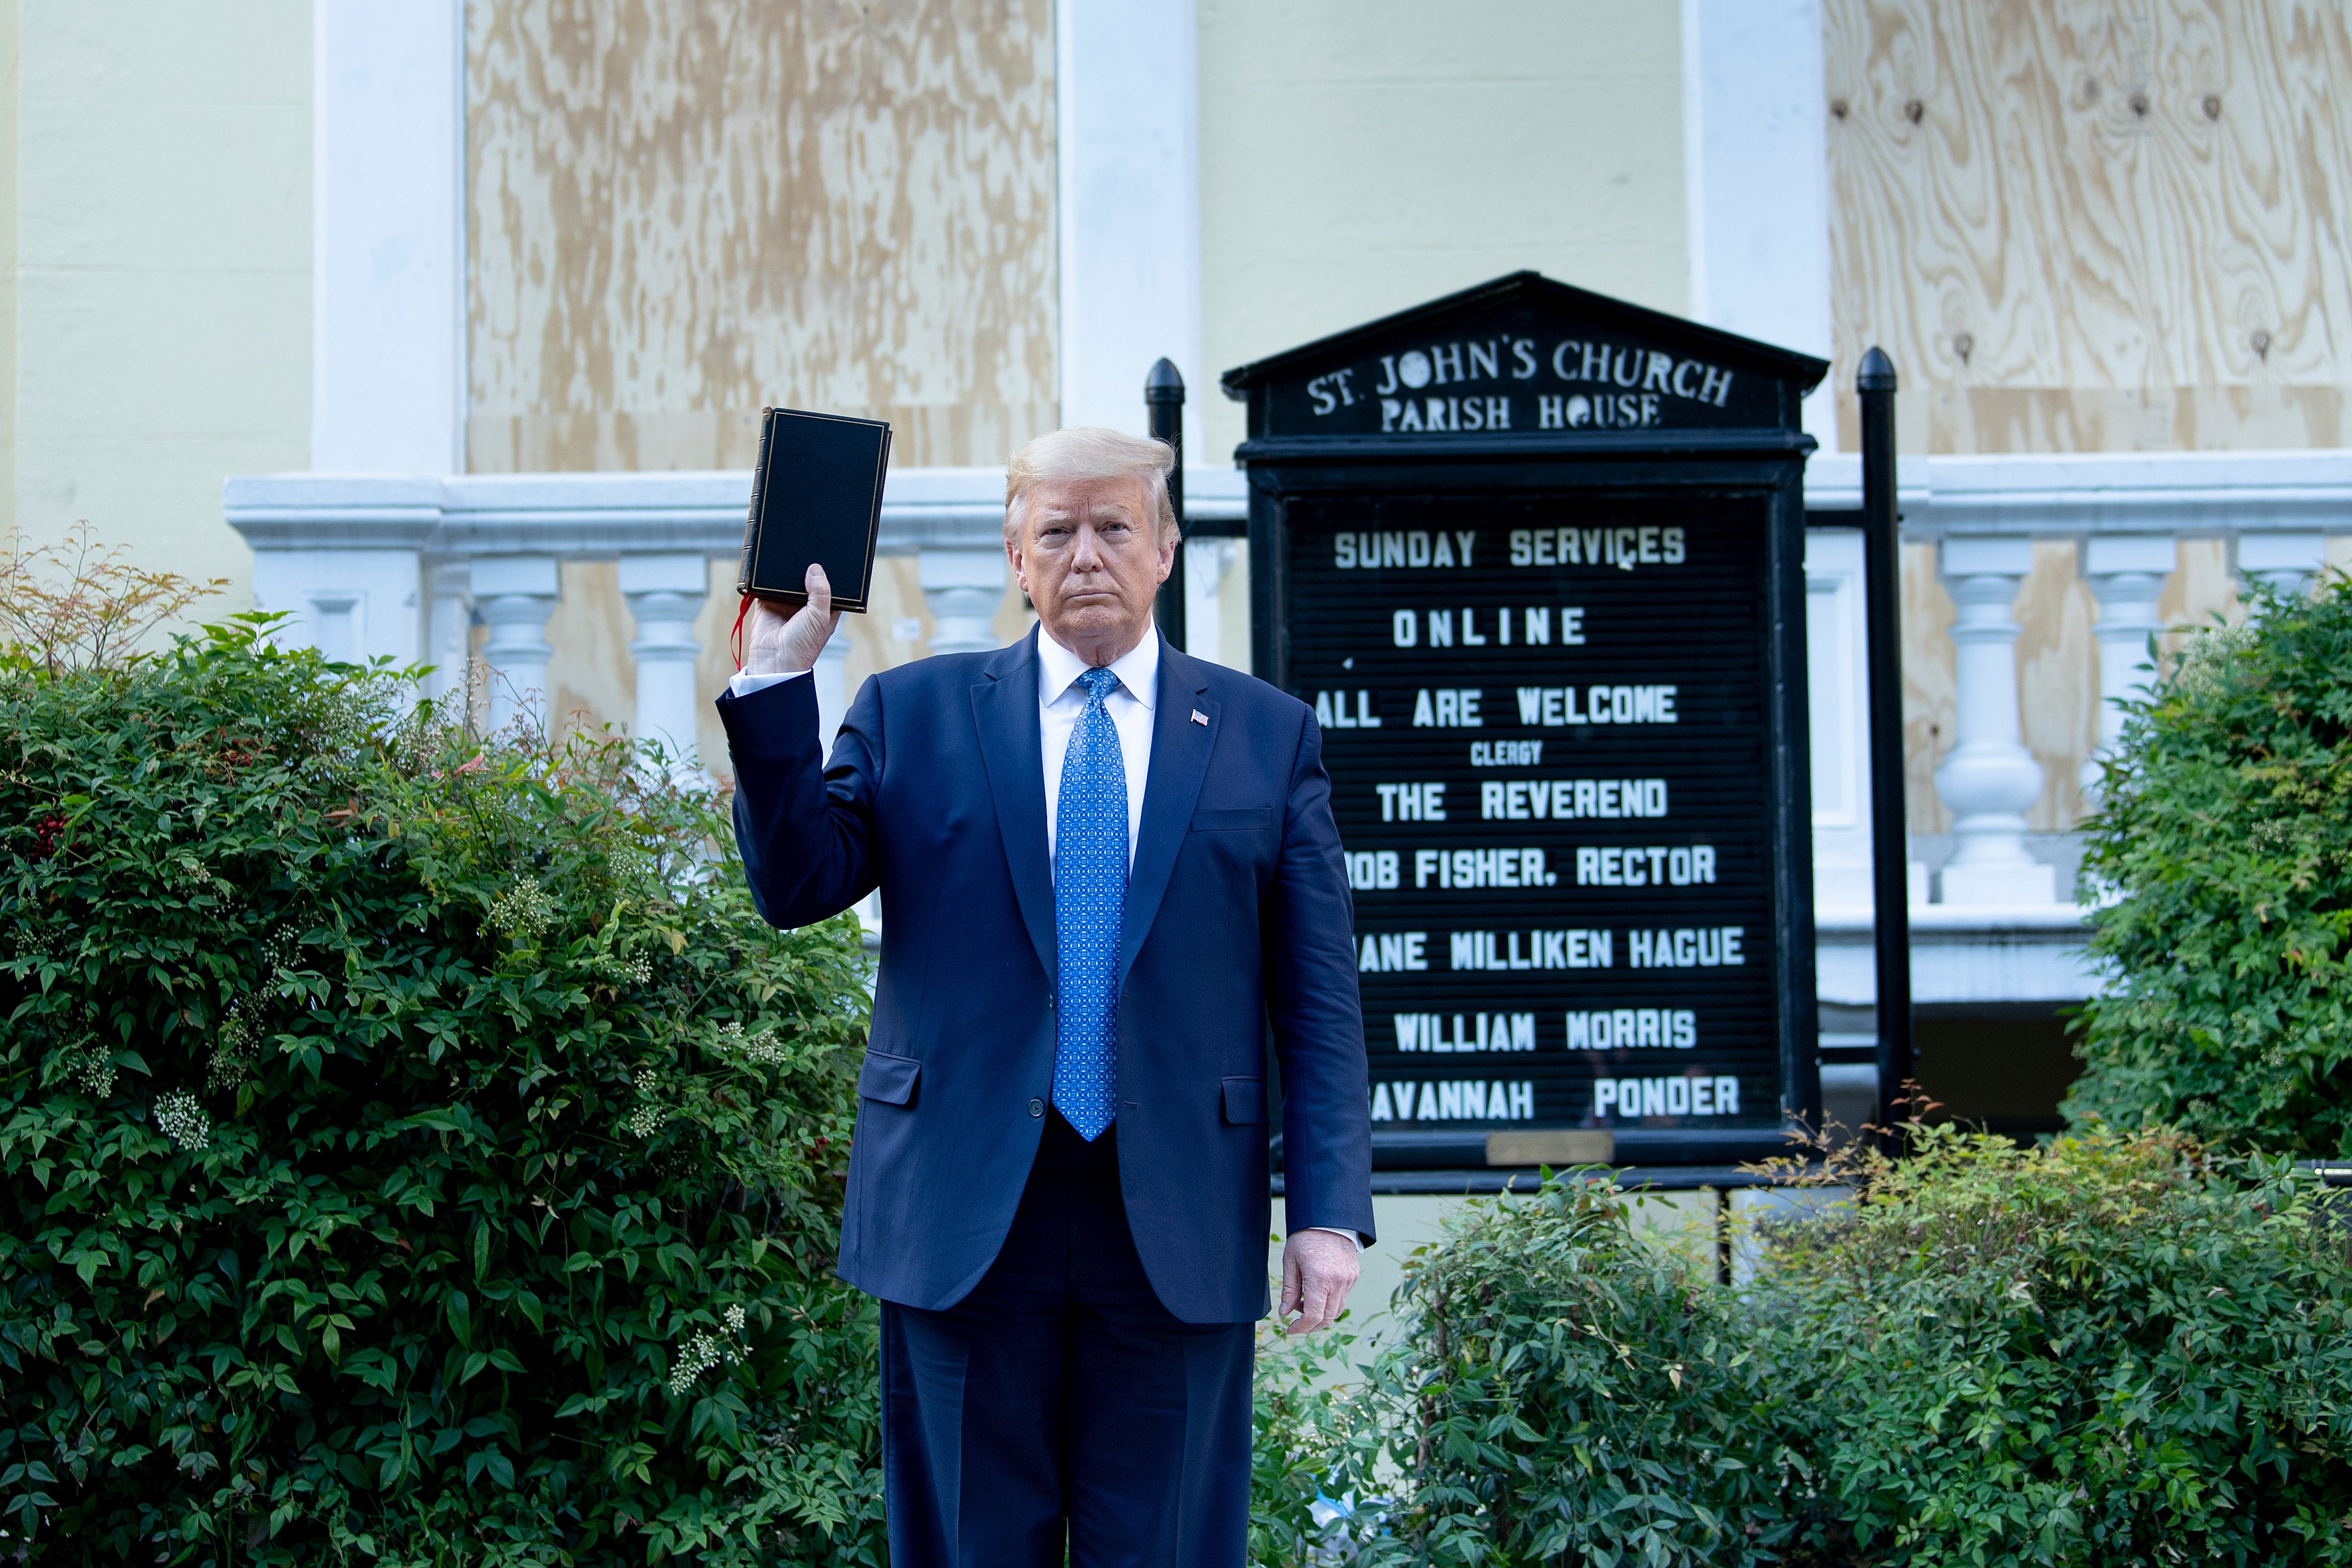 Donald Trump holds a Bible while visiting St John’s Church across from the White House amid George Floyd protests on 1 June, 2020